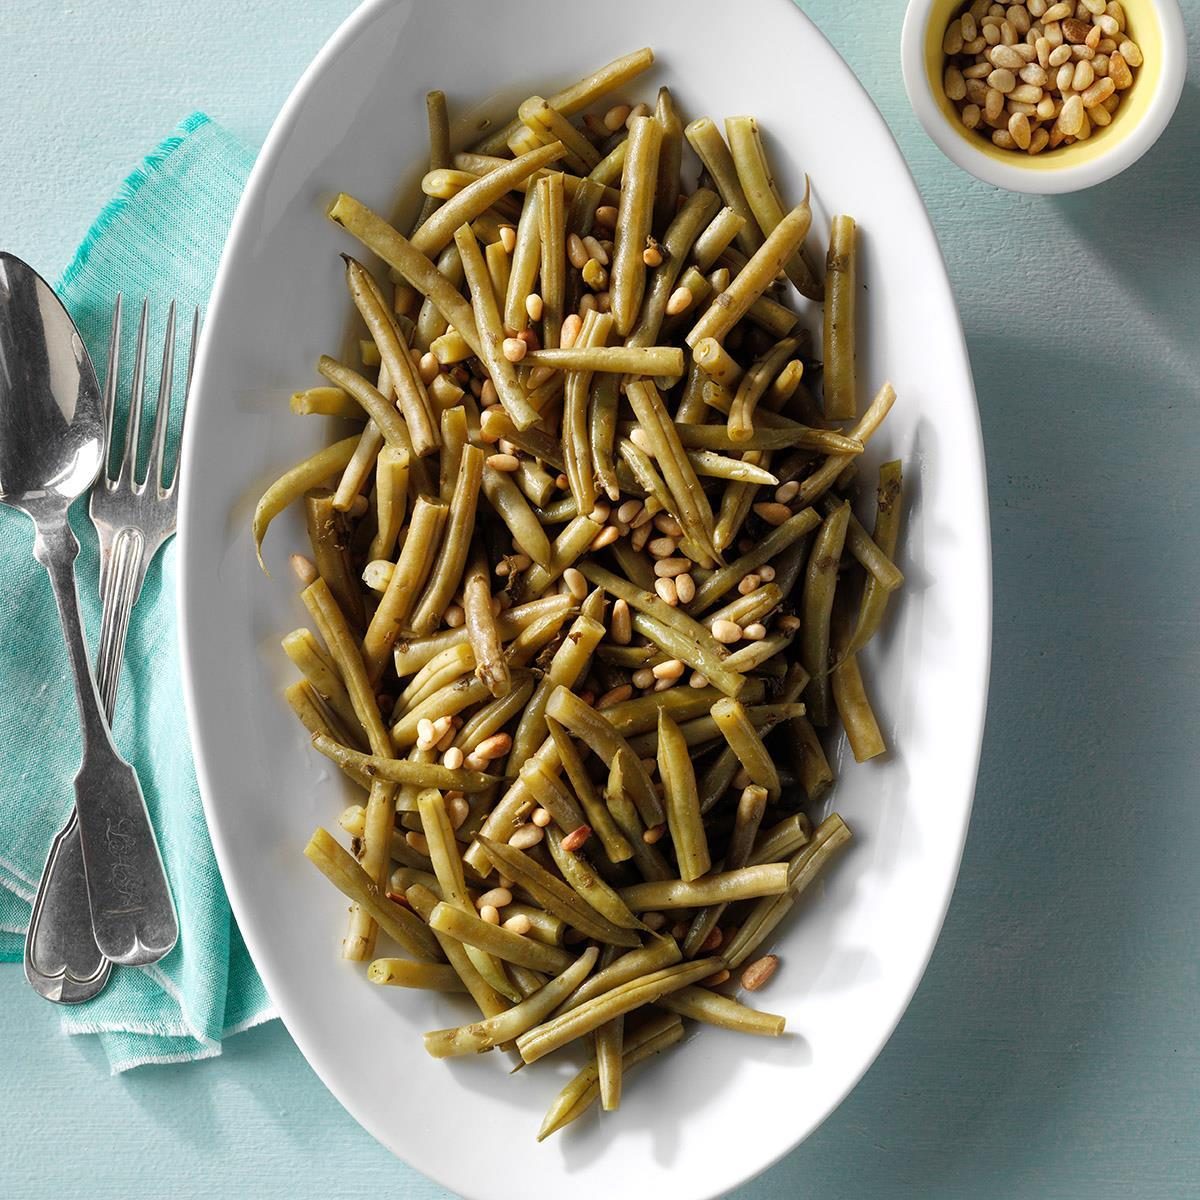 Oregano Green Beans With Toasted Pine Nuts Exps Sdjj19 107152 E02 07 3b 2